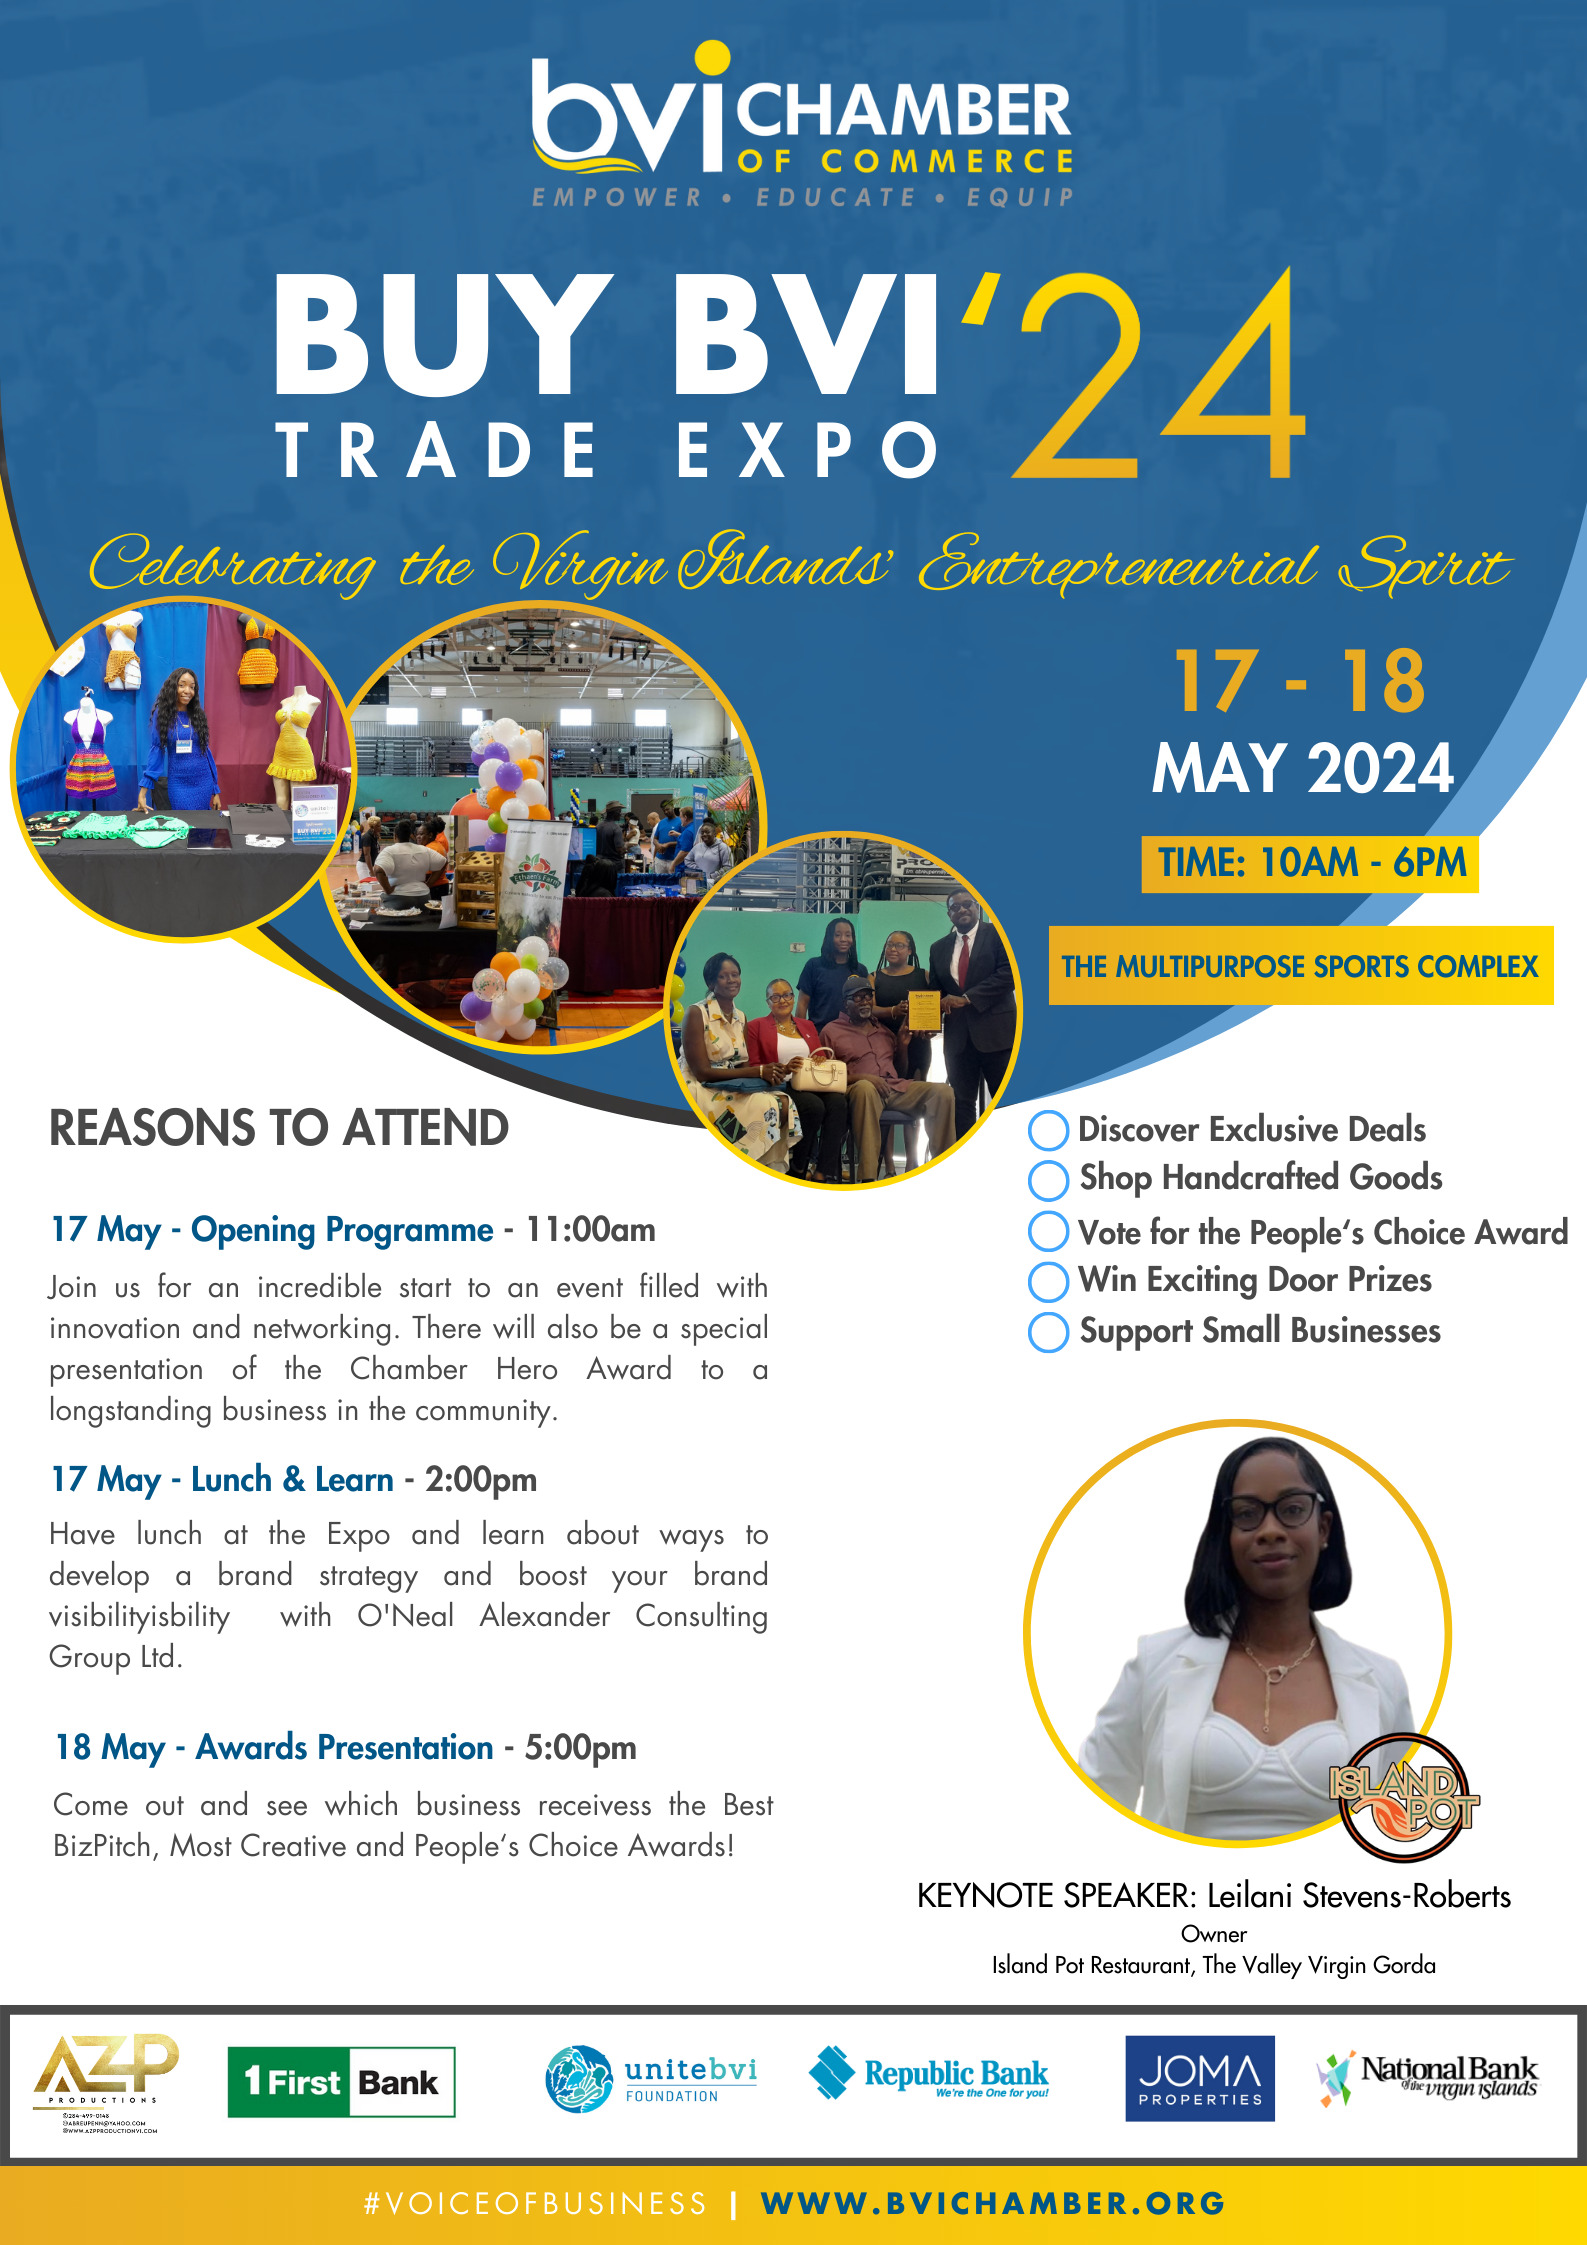 _BBTE 24 Flyer - Reasons to attend